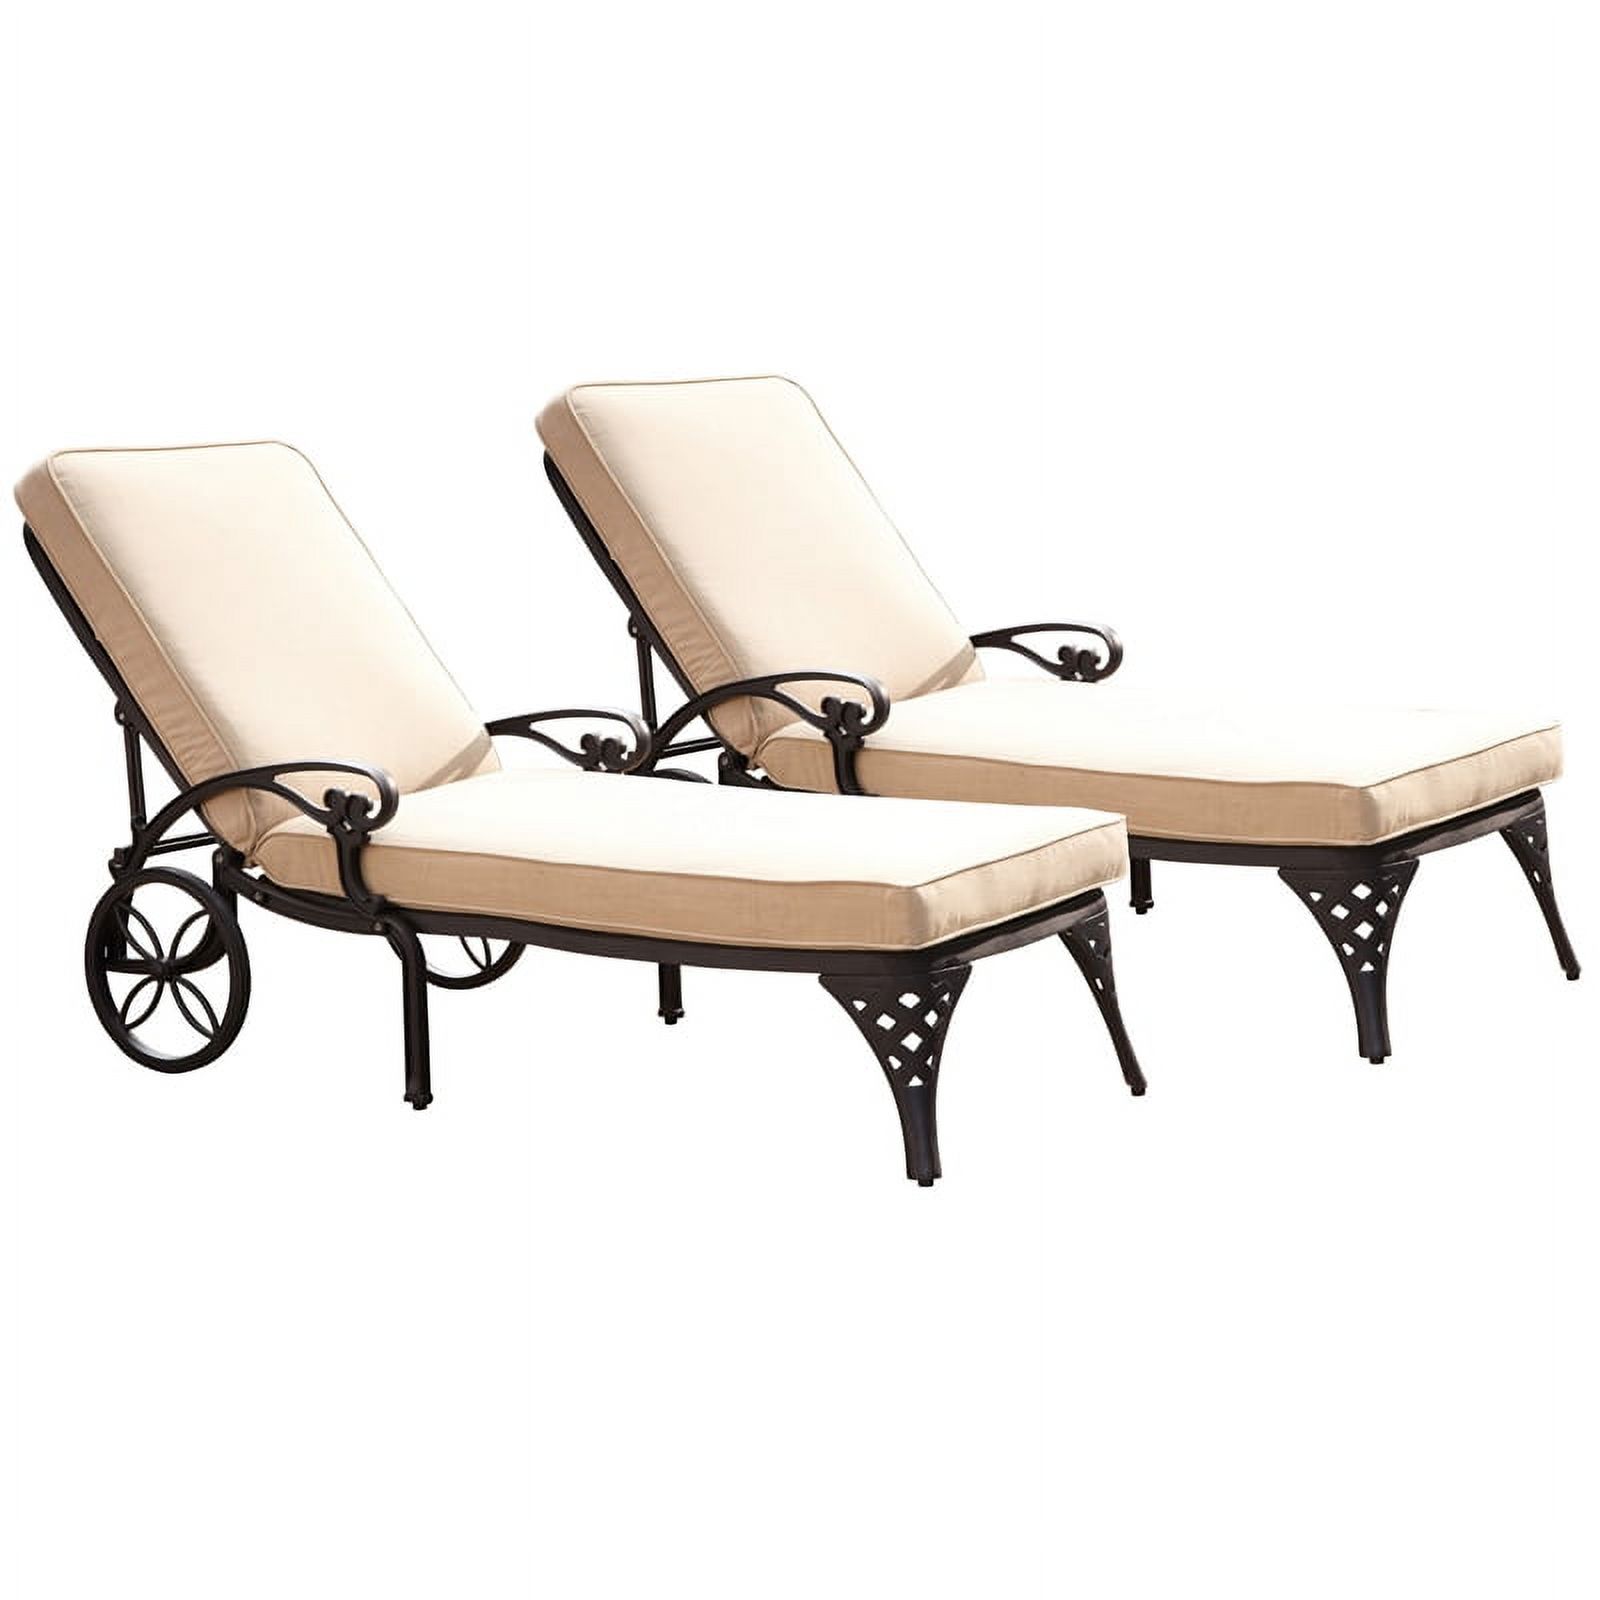 Pemberly Row Traditional Aluminum Chaise Lounge with Cushion - image 2 of 4